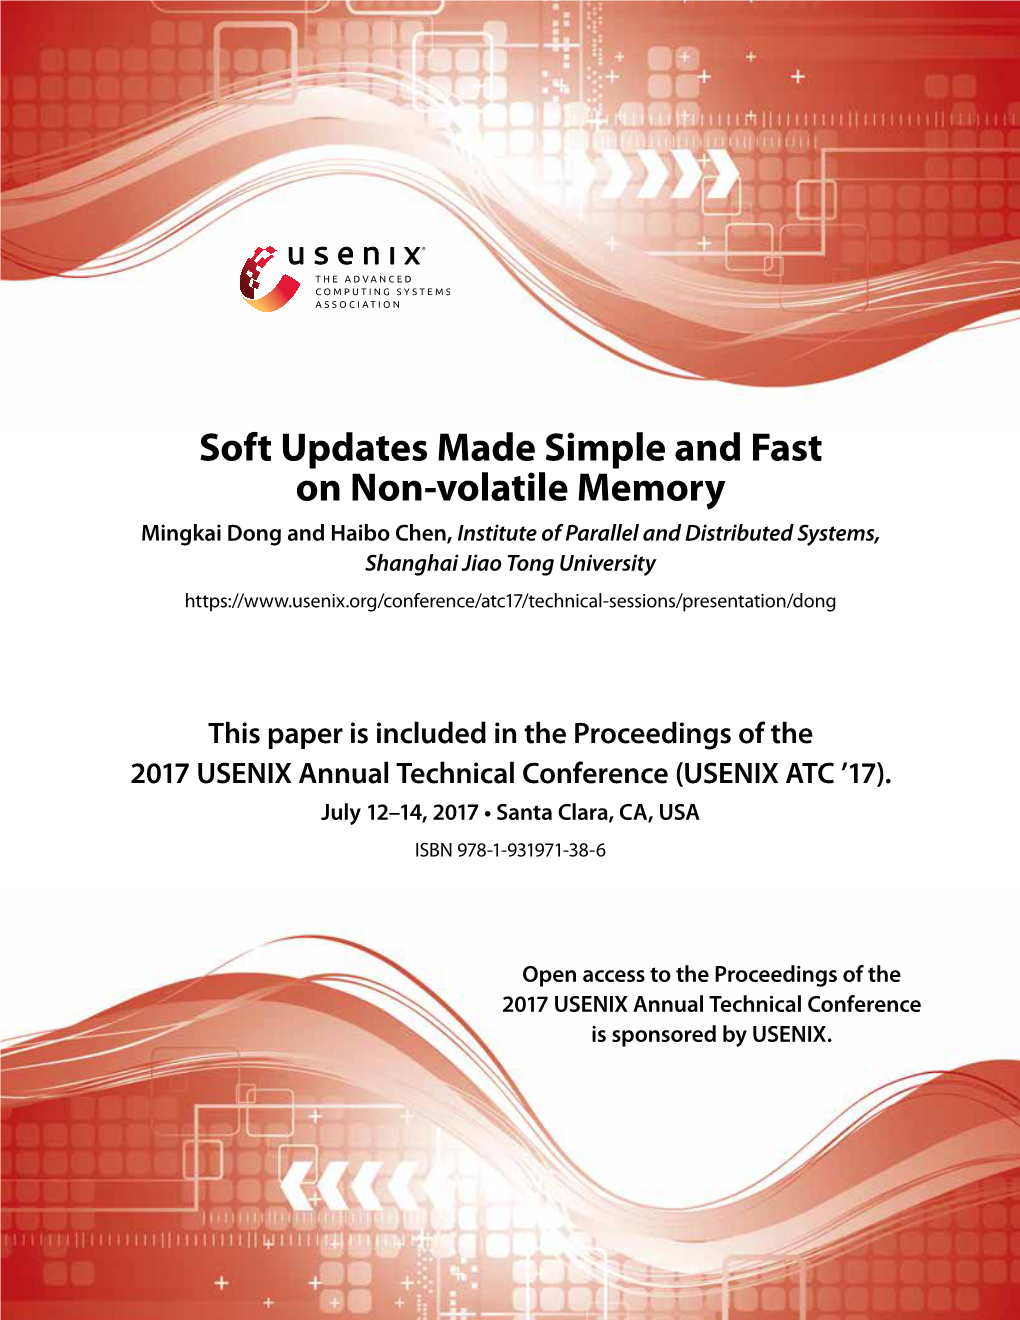 Soft Updates Made Simple and Fast on Non-Volatile Memory